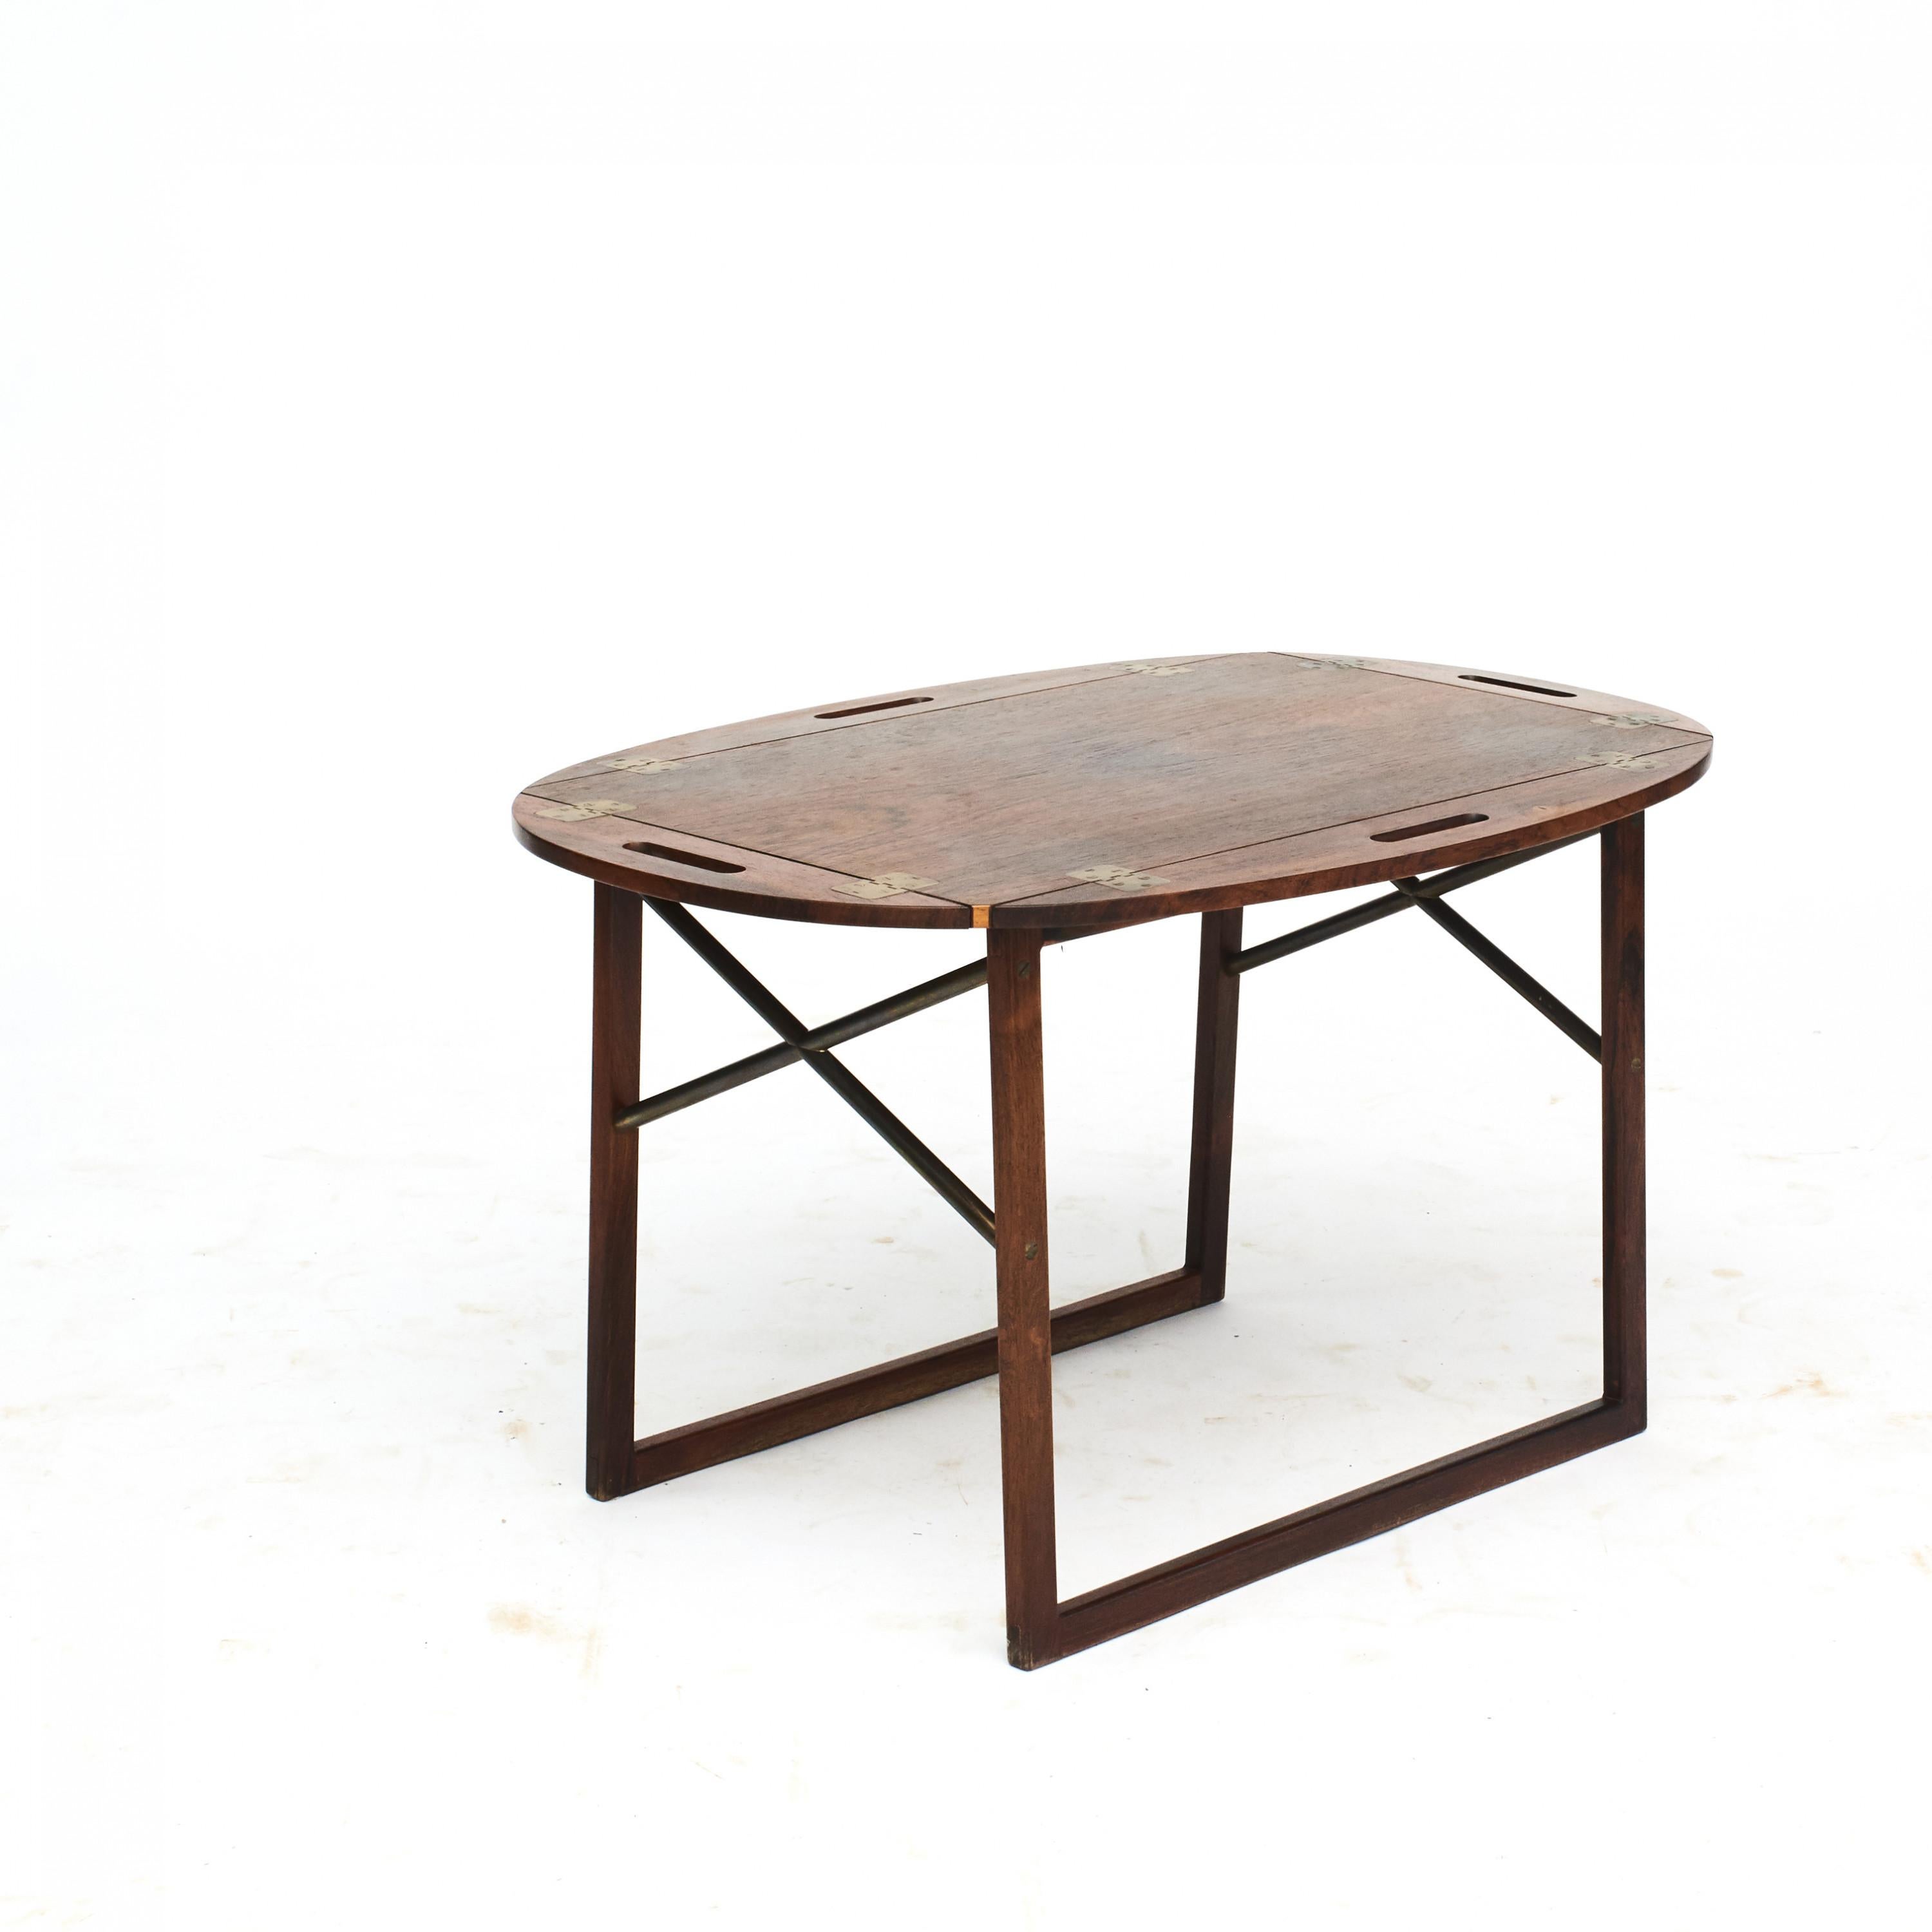 Butler's tray in rosewood designed by Svend Langkilde.
Hinges and cross stretchers in brass.

Designed by Svend Langkilde, Denmark, c. 1965.
 